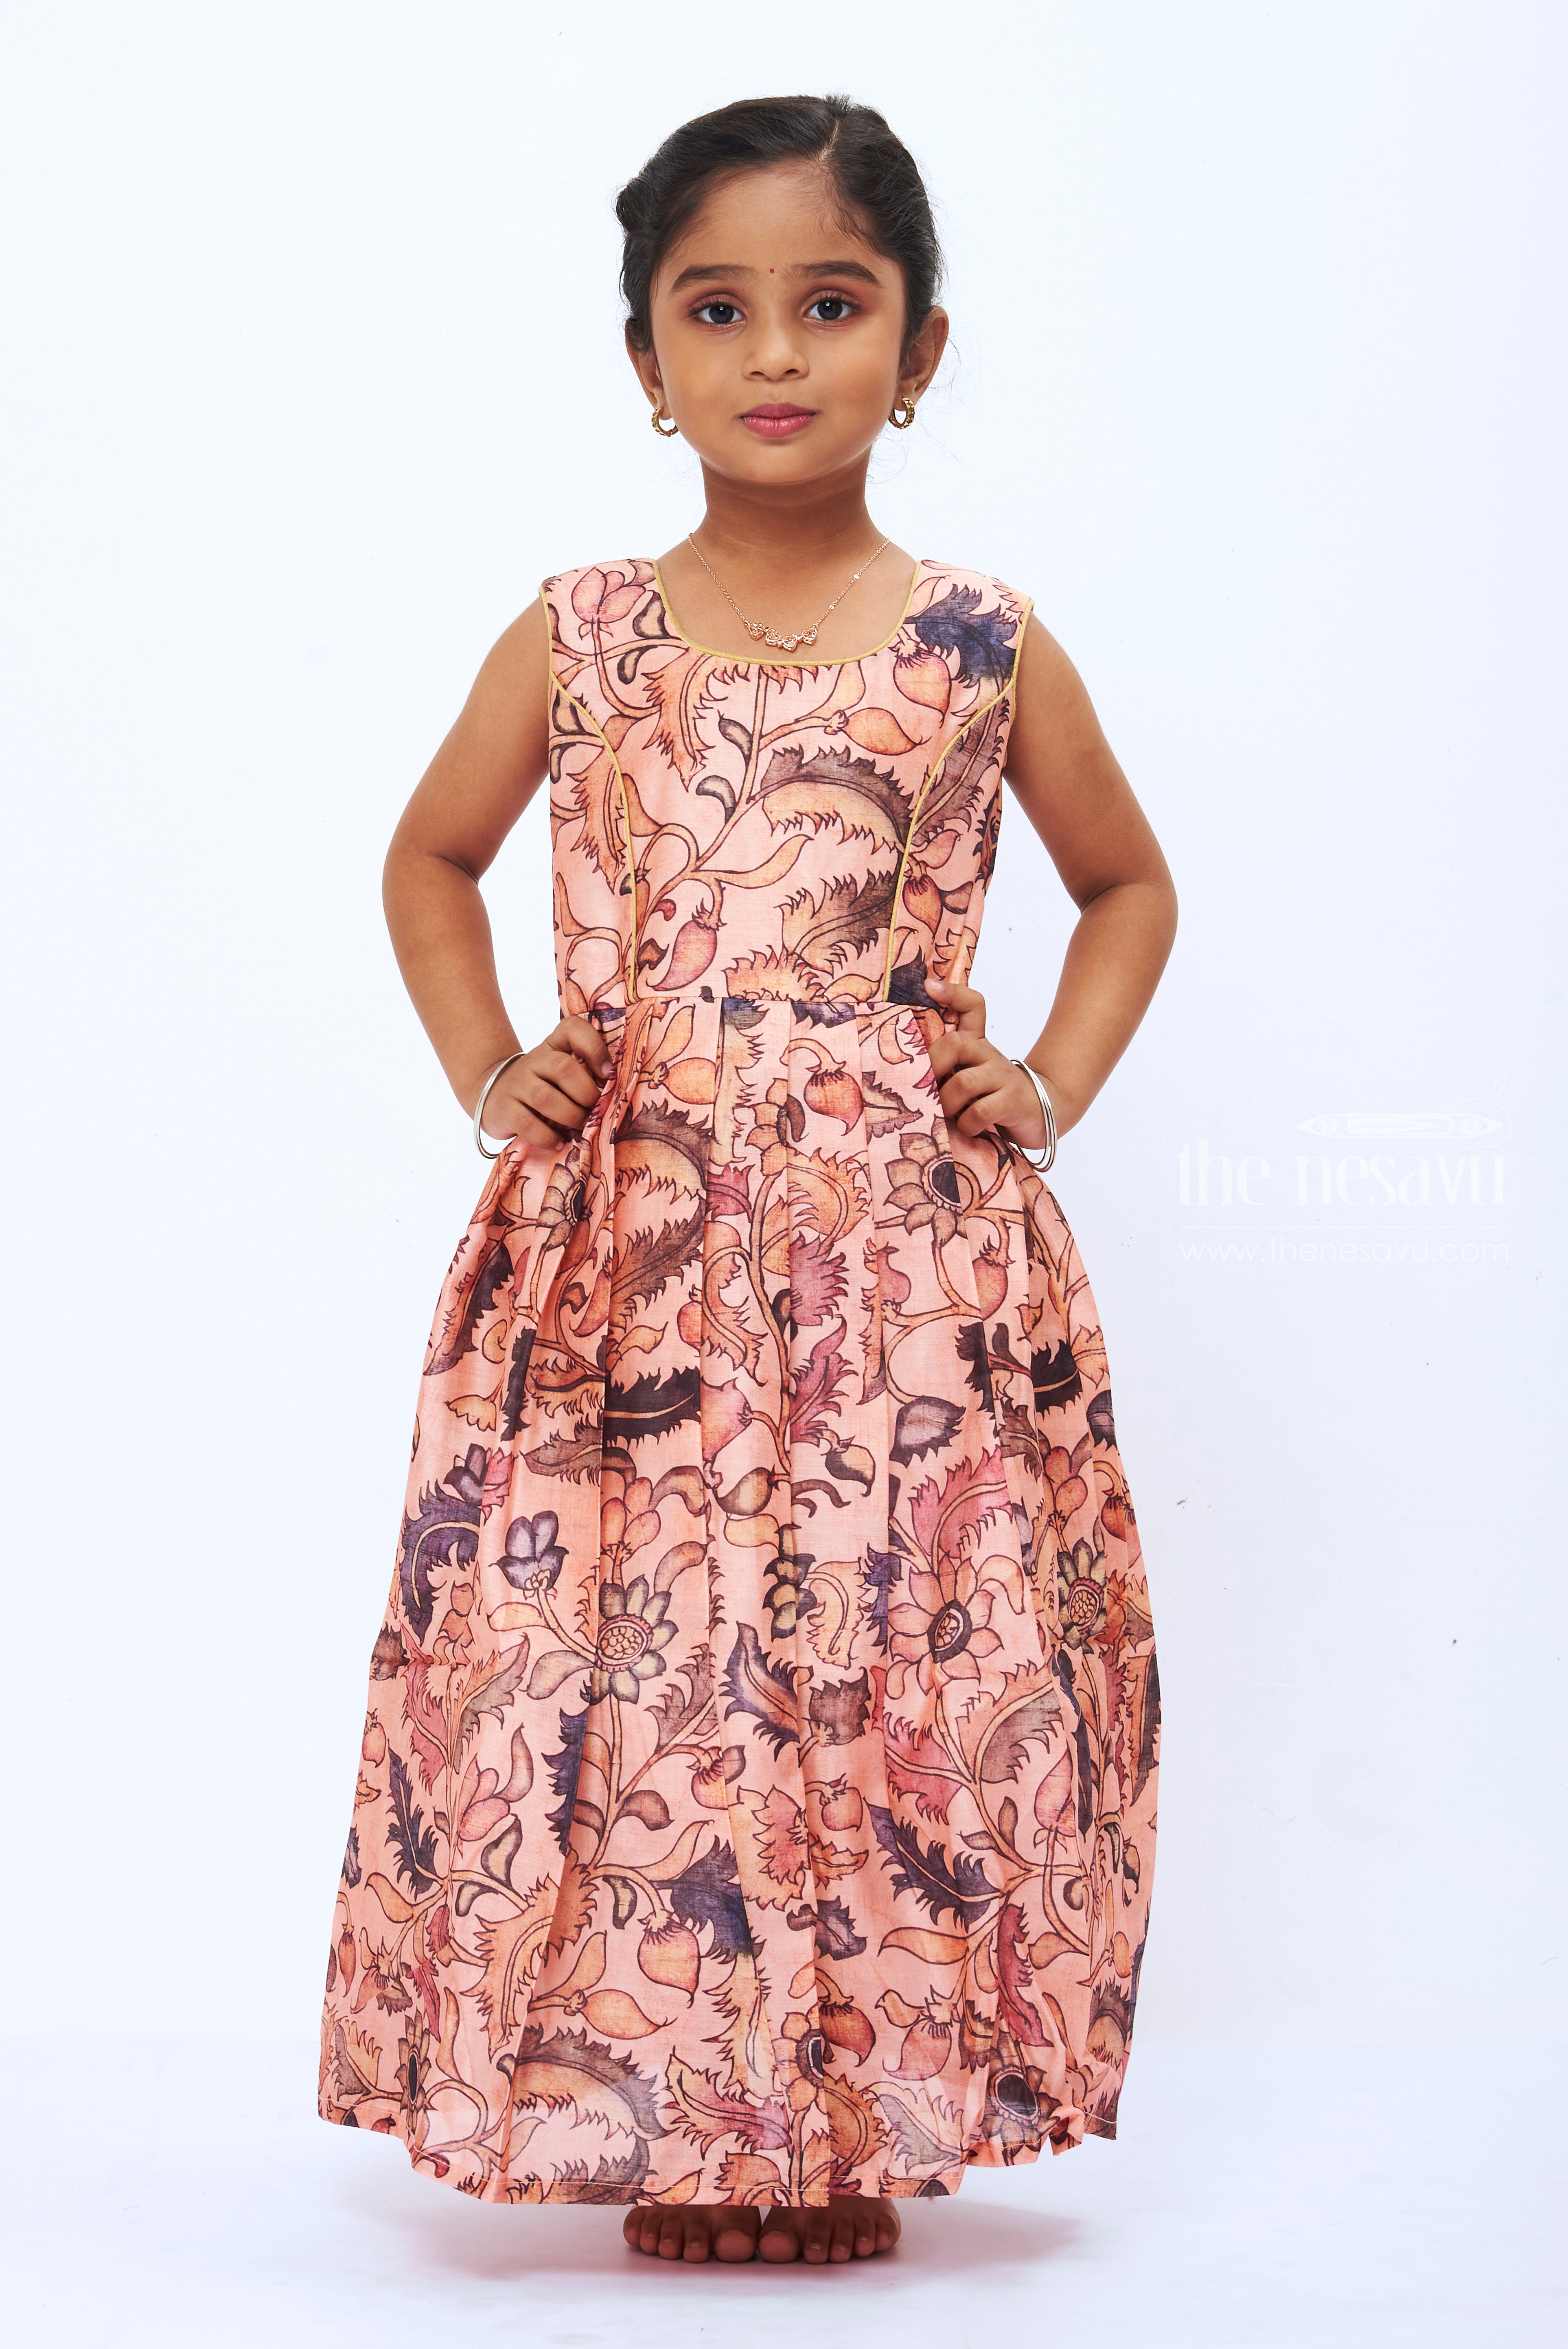 Lauderdale Flower Girl Dresses For Wedding – Mia Bambina Boutique